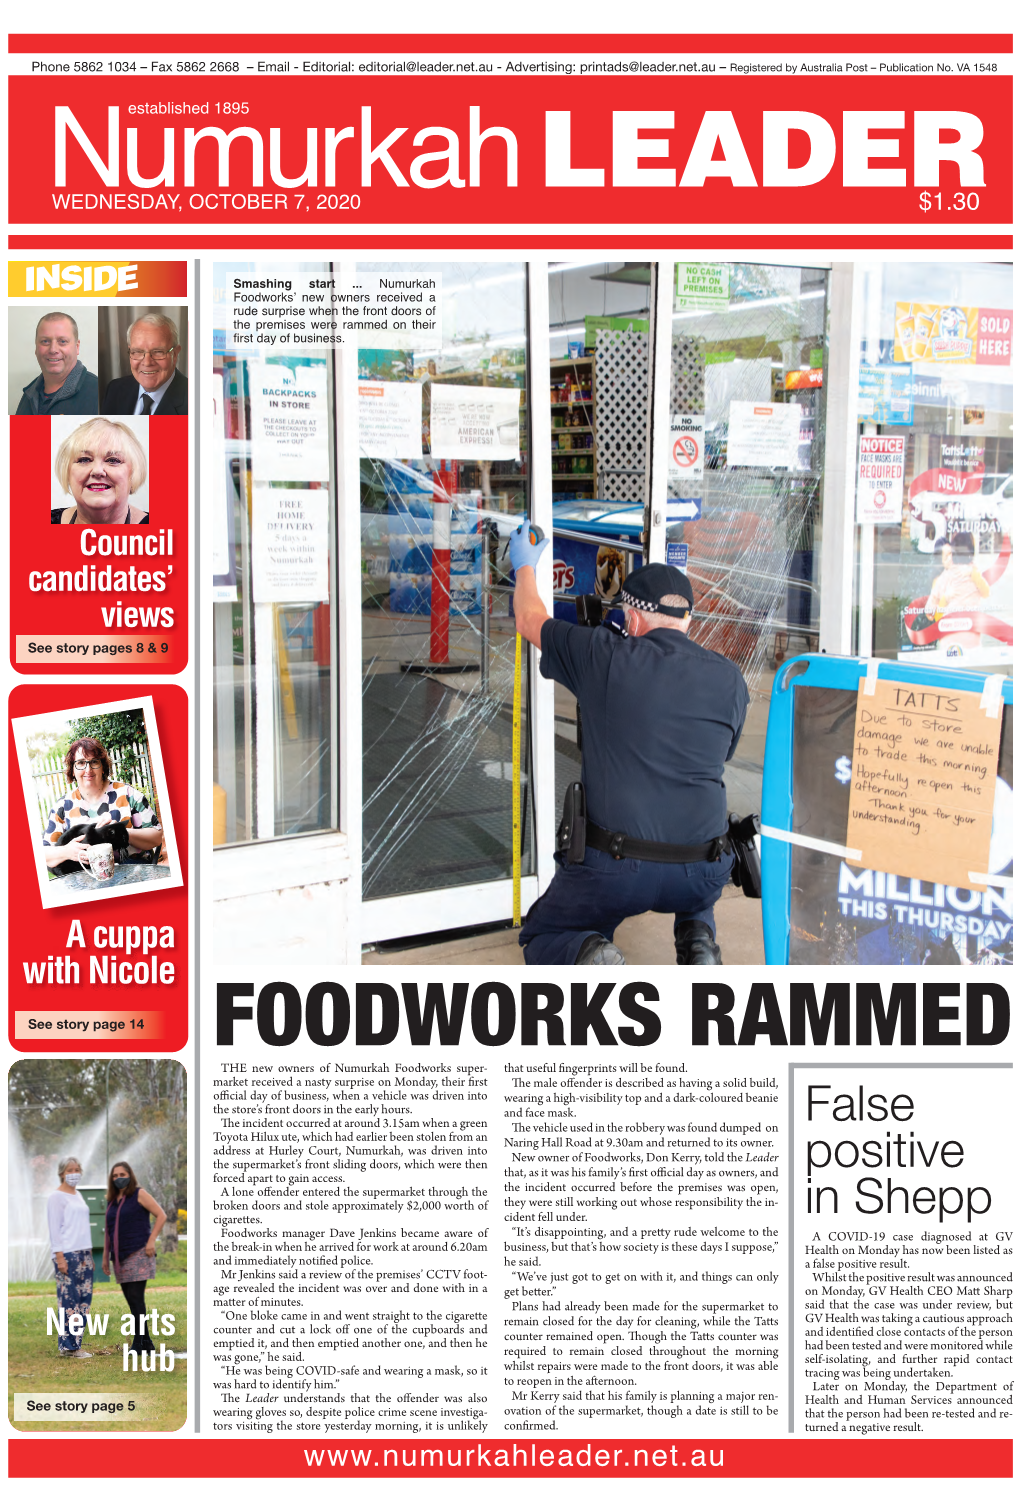 FOODWORKS RAMMED the New Owners of Numurkah Foodworks Super- That Useful Ngerprints Will Be Found